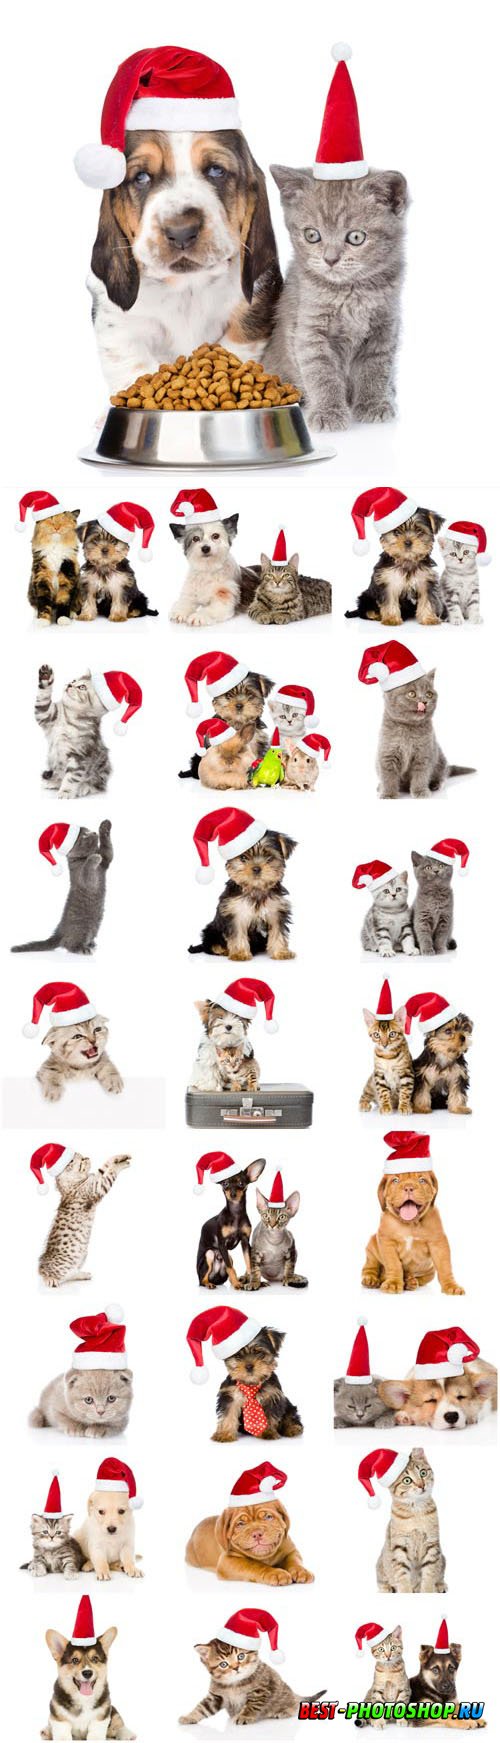 New Year and Christmas stock photos 52